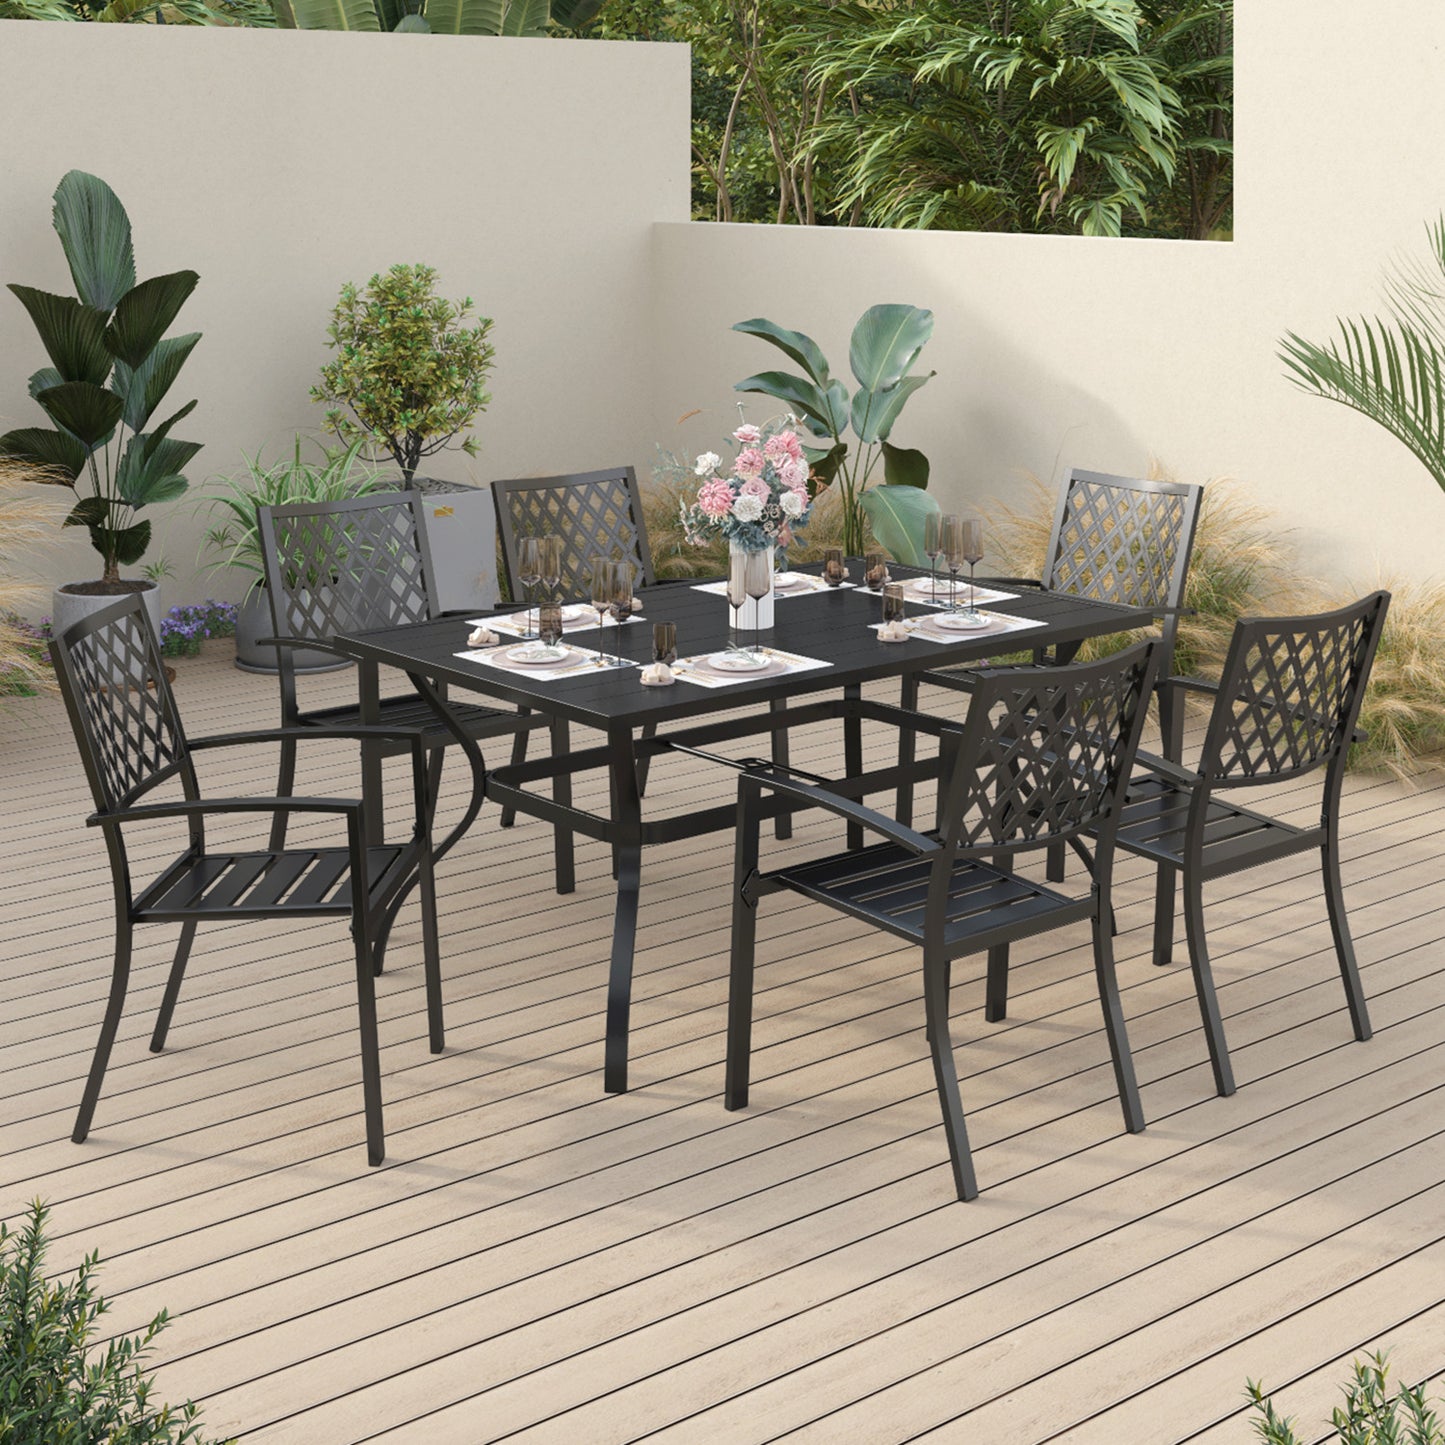 Sophia & William 7 Piece Metal Outdoor Patio Dining Bistro Sets Outdoor Table and Chairs with 6 Metal Stackable Chairs and 60" x 38" Rectangle Table, Black